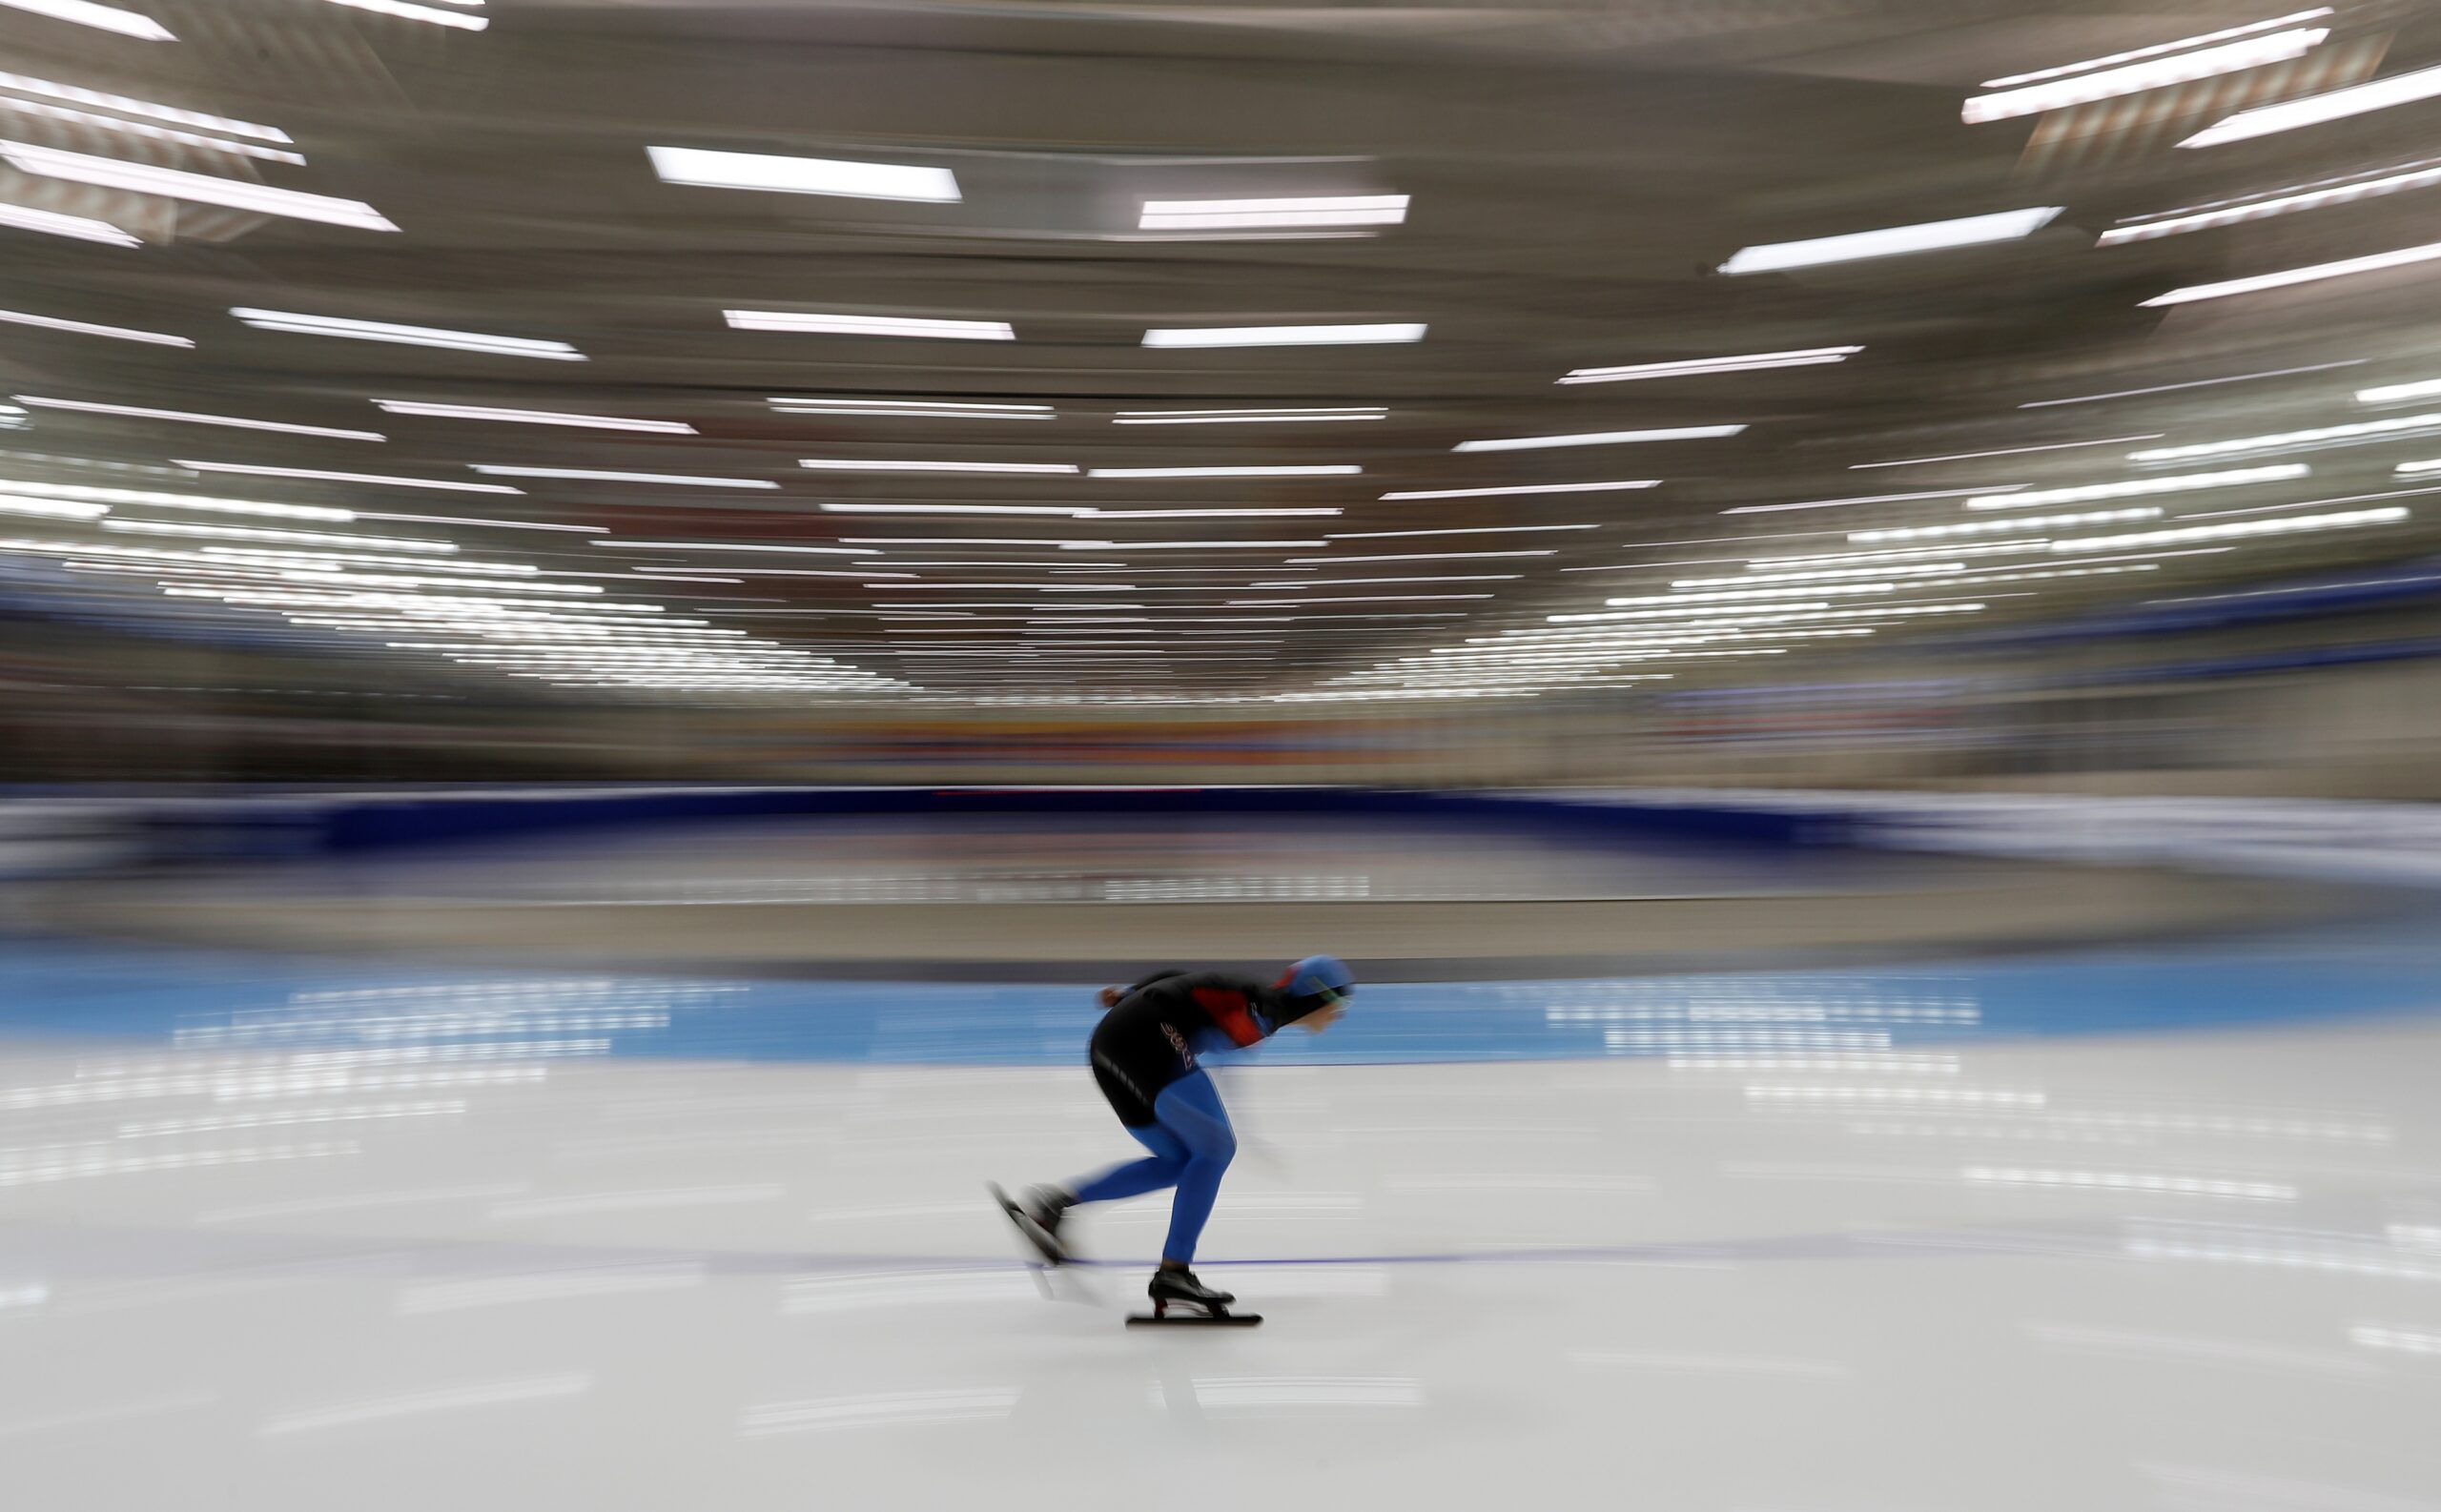 Olympic US Speedskaters Could Be Key To Increasing Sport’s Popularity